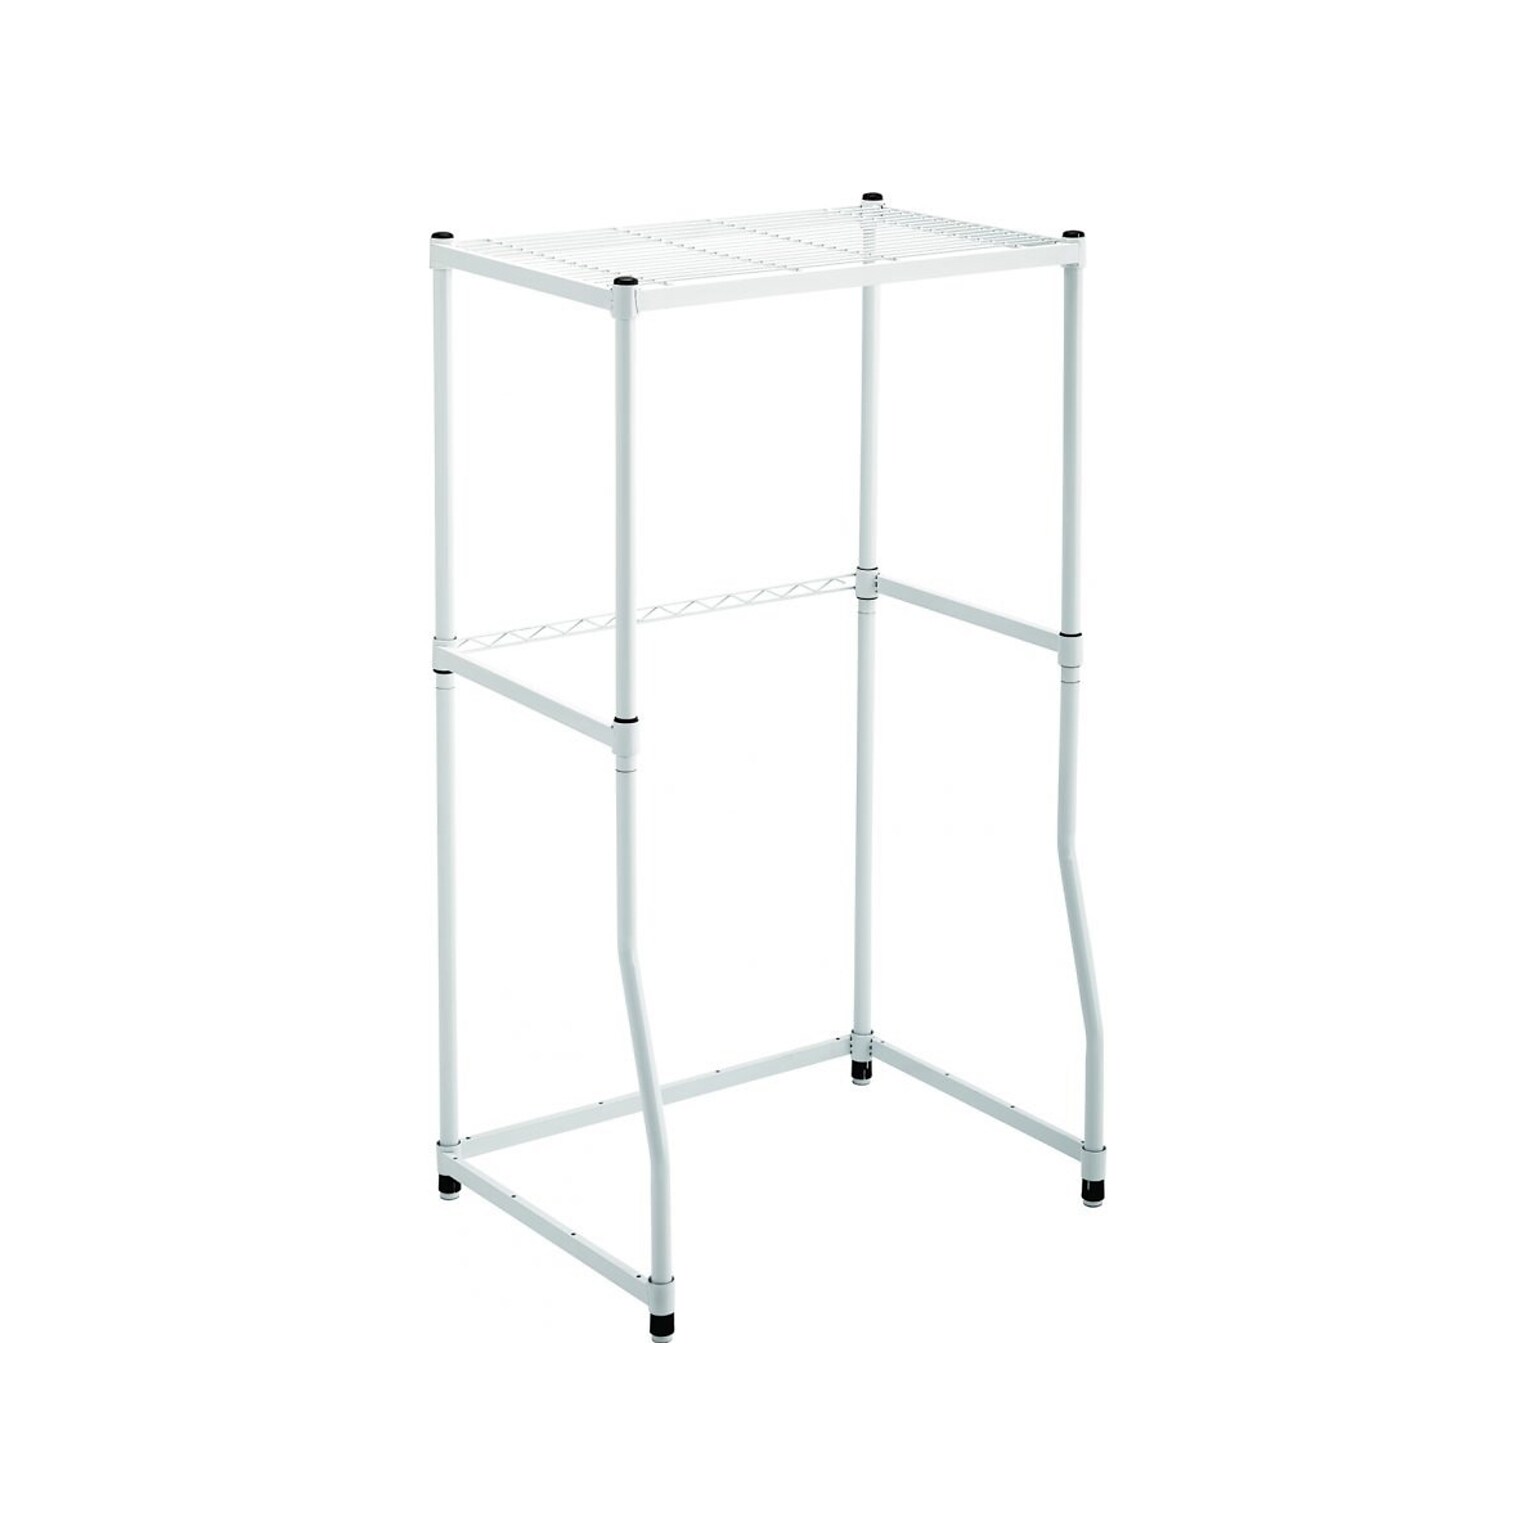 Dandy Laundry Stand, White (DLS060WDB)